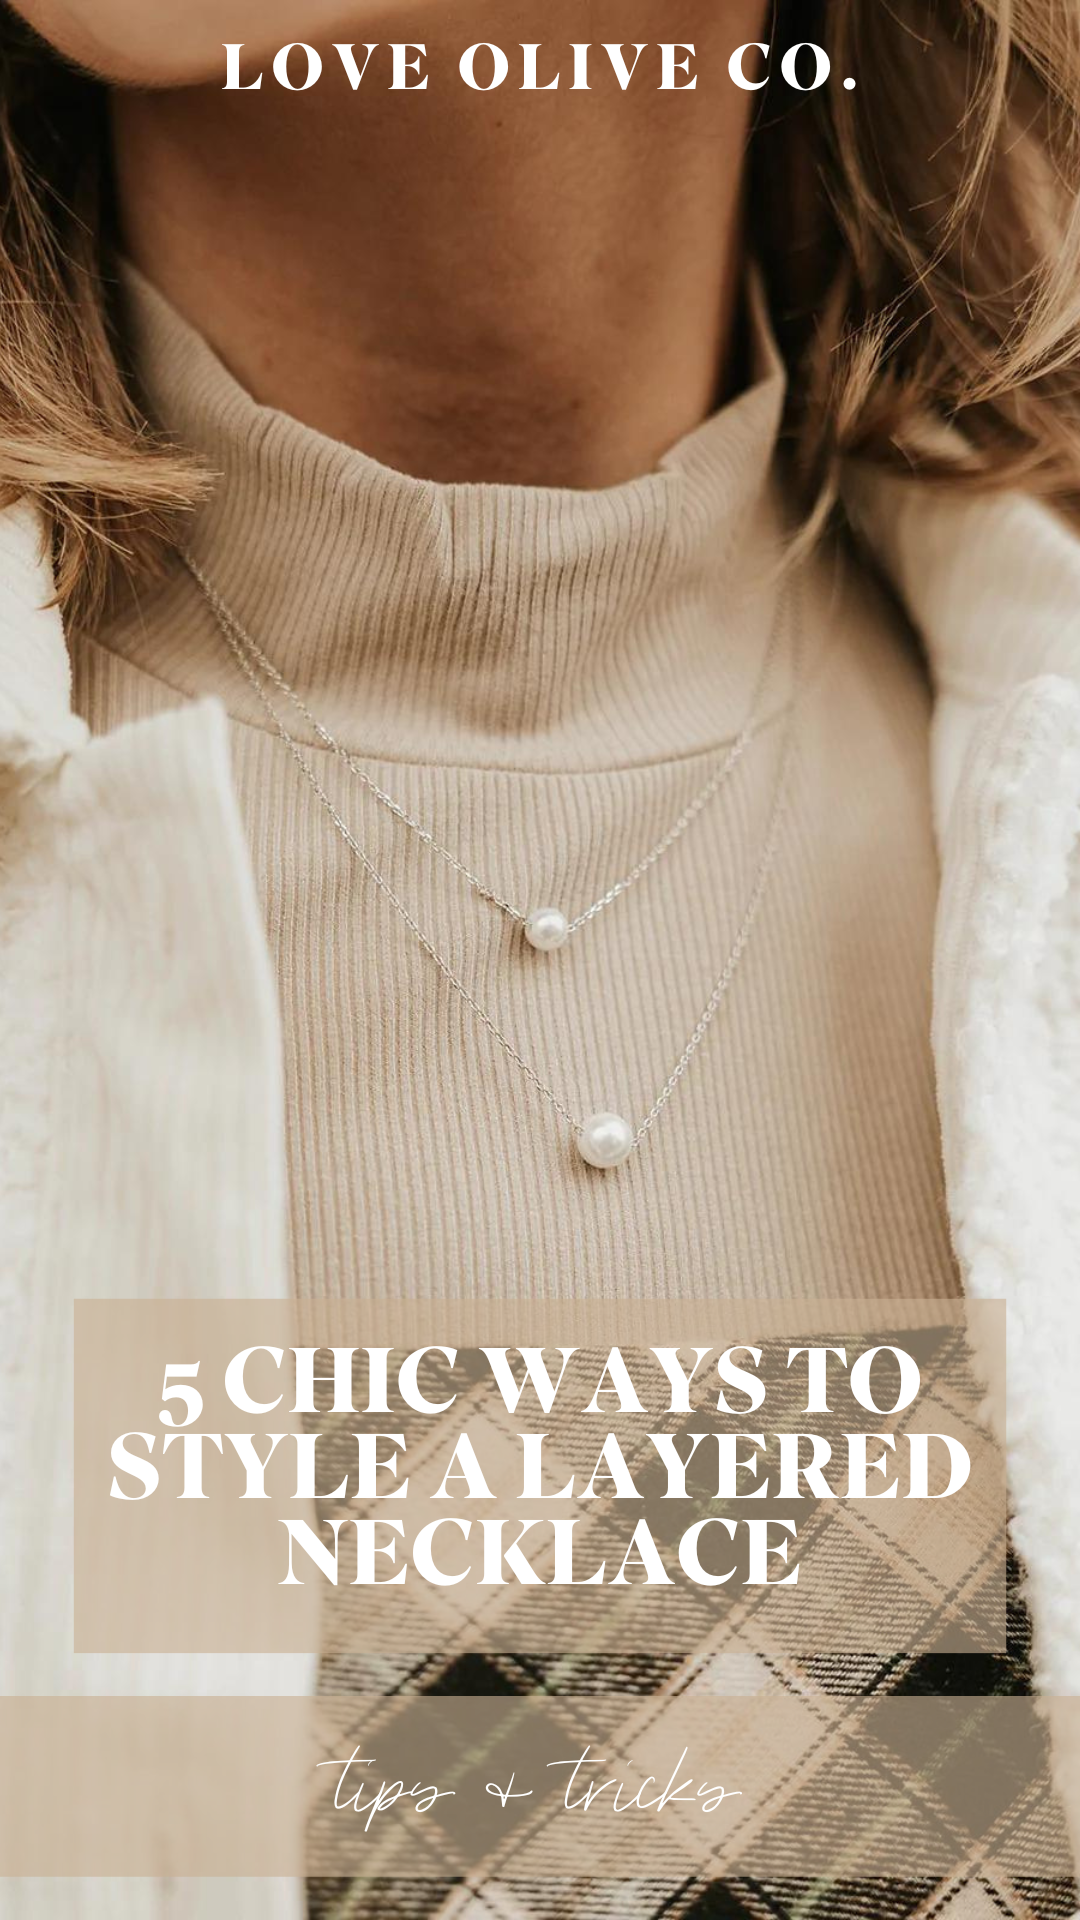 5 chic ways to style a layered necklace. www.www.loveoliveshop.com